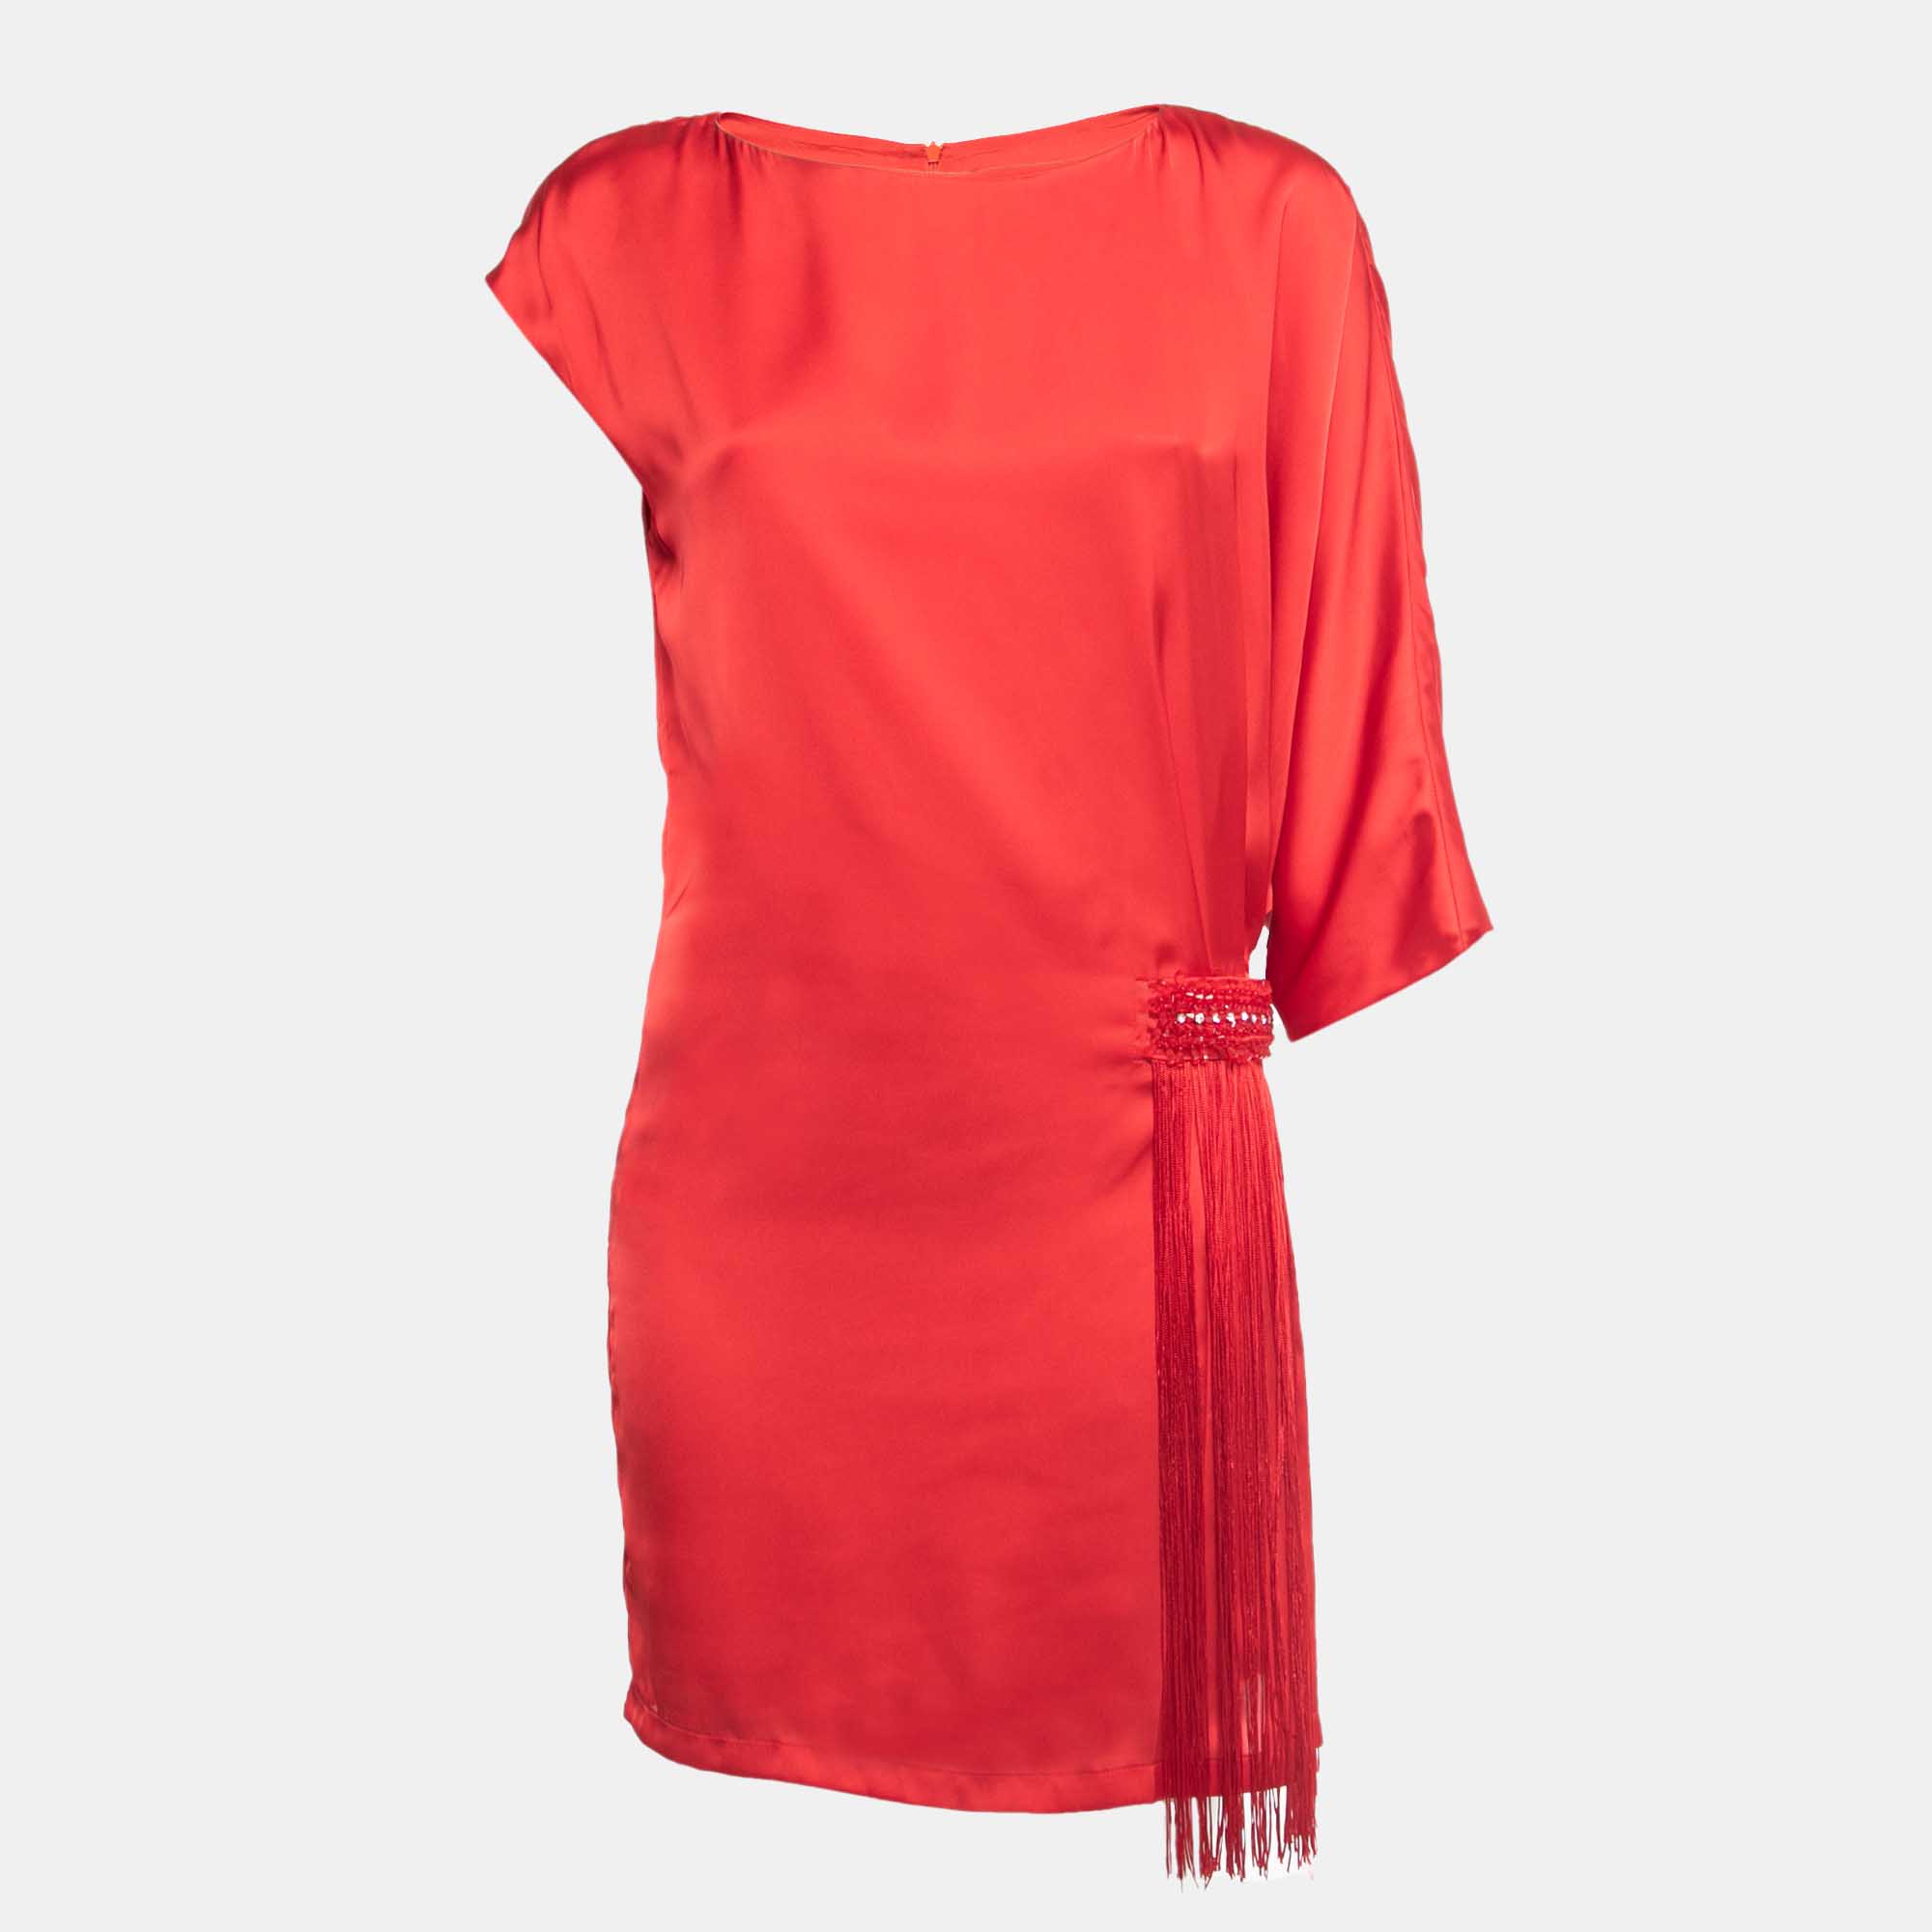 Class by roberto cavalli red satin fringed detail tunic dress m